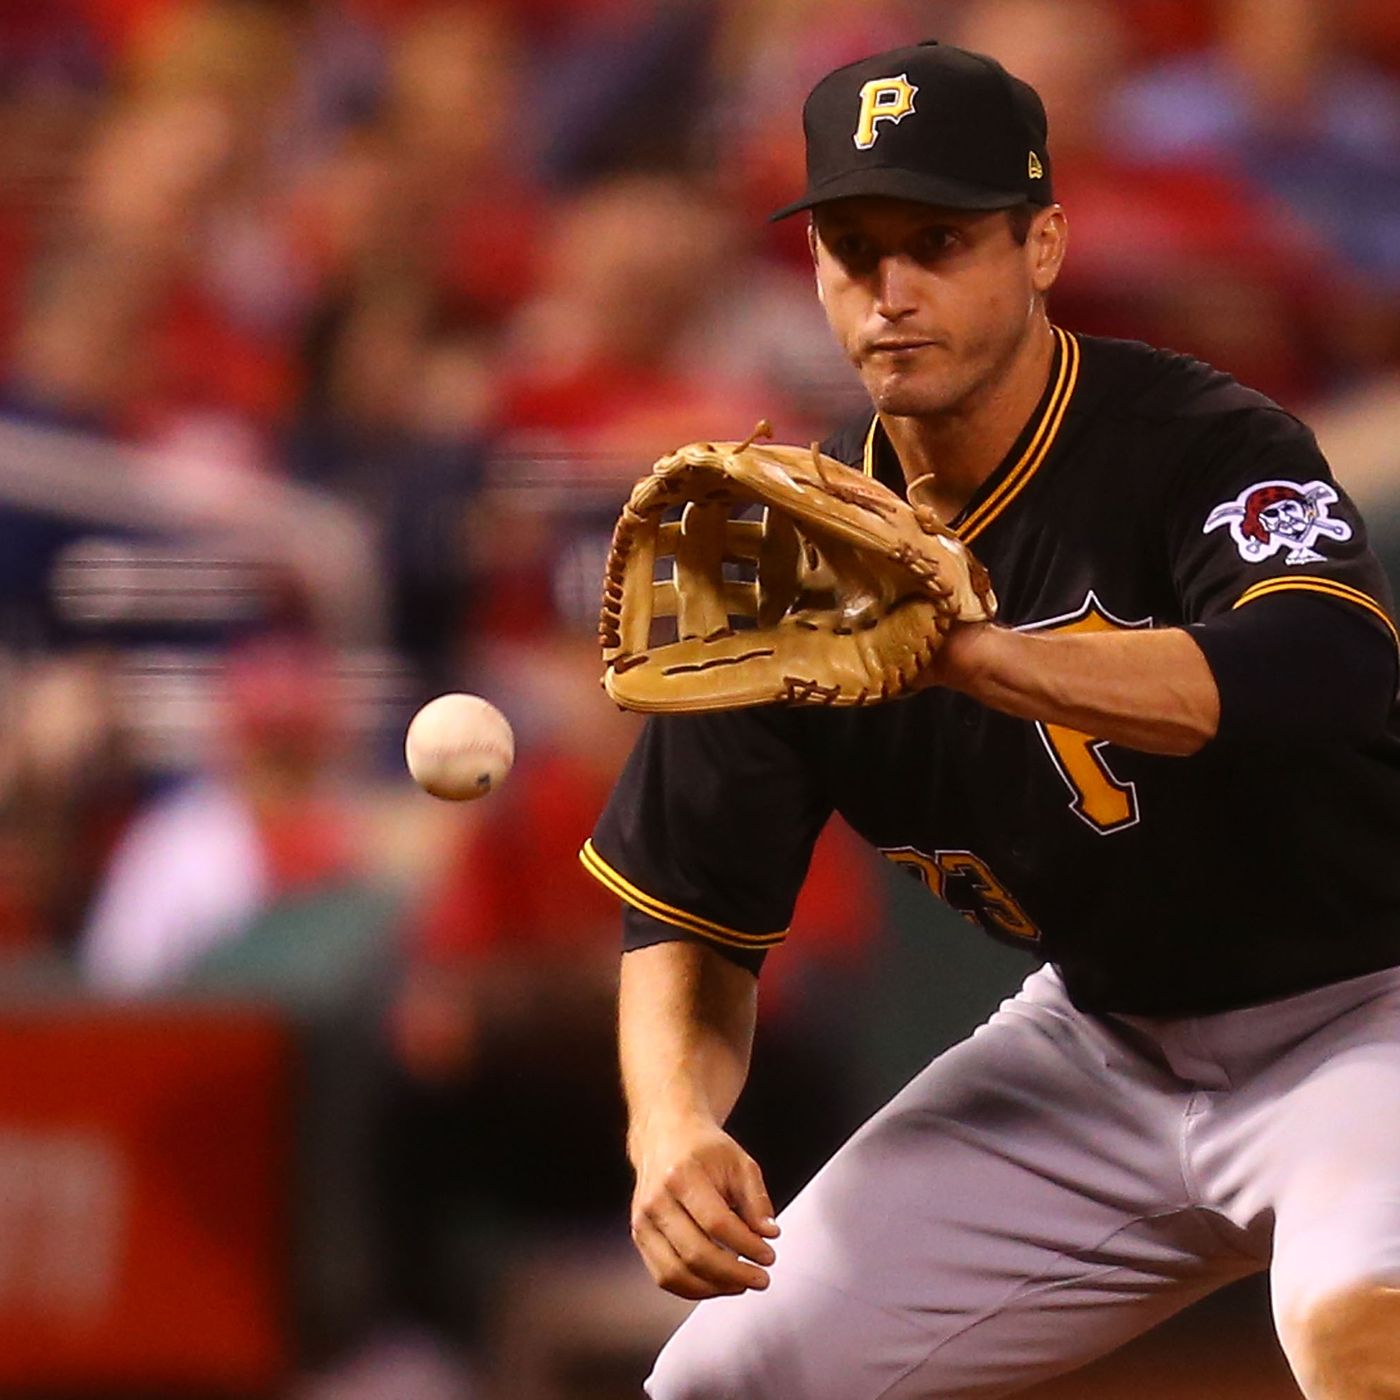 David Freese is the strongest player in Major League Baseball - MLB ...